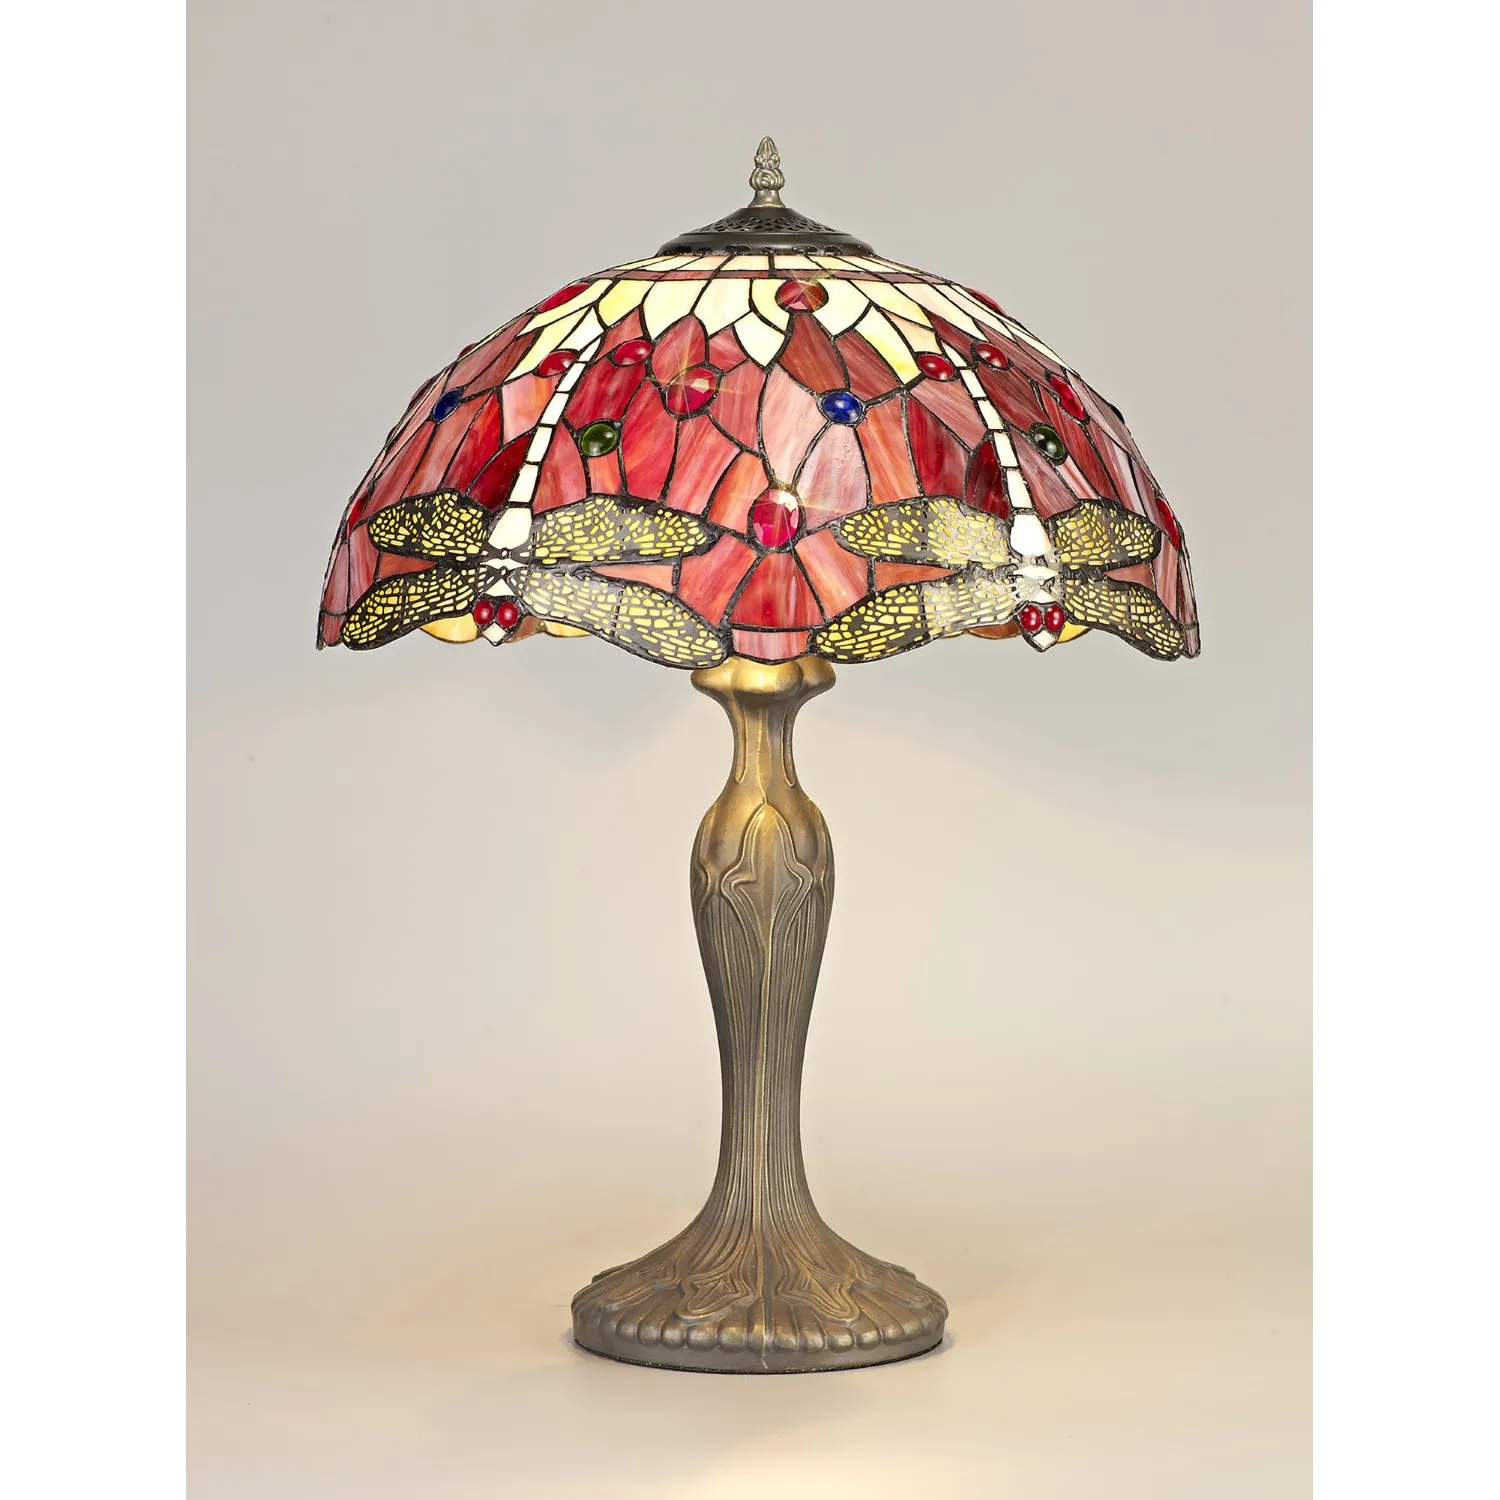 Hitchin 2 Light Curved Table Lamp E27 With 40cm Tiffany Shade, Purple Pink Crystal Aged Antique Brass